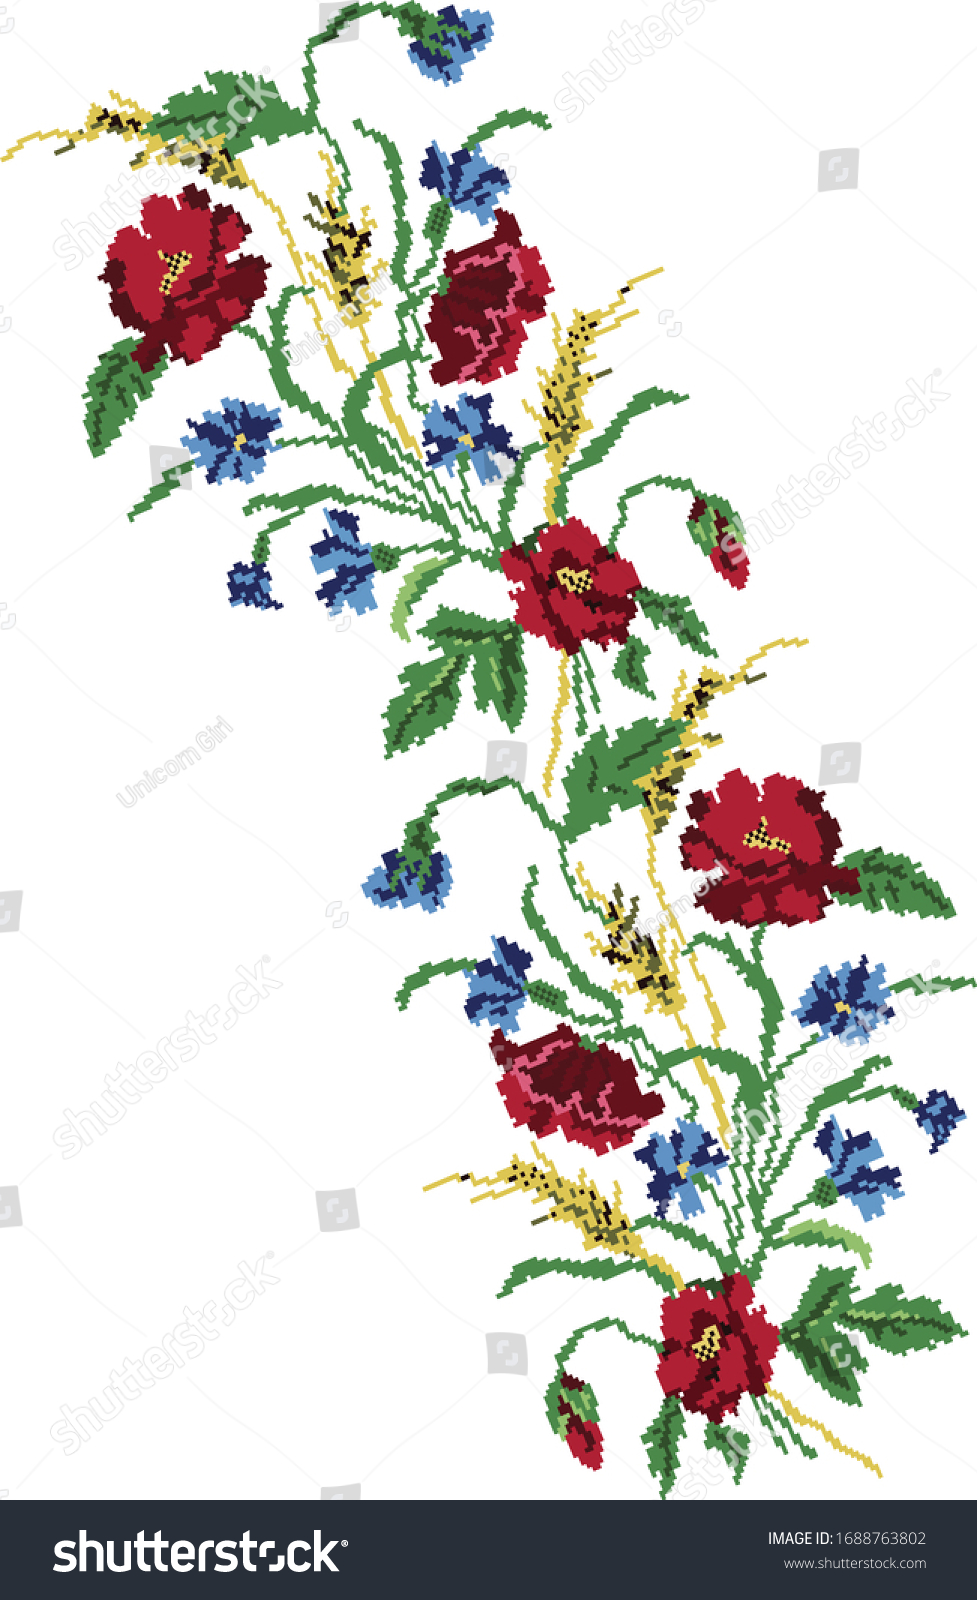 SVG of Scheme for embroidery vegetable composition of poppies, cornflowers and ears of wheat svg